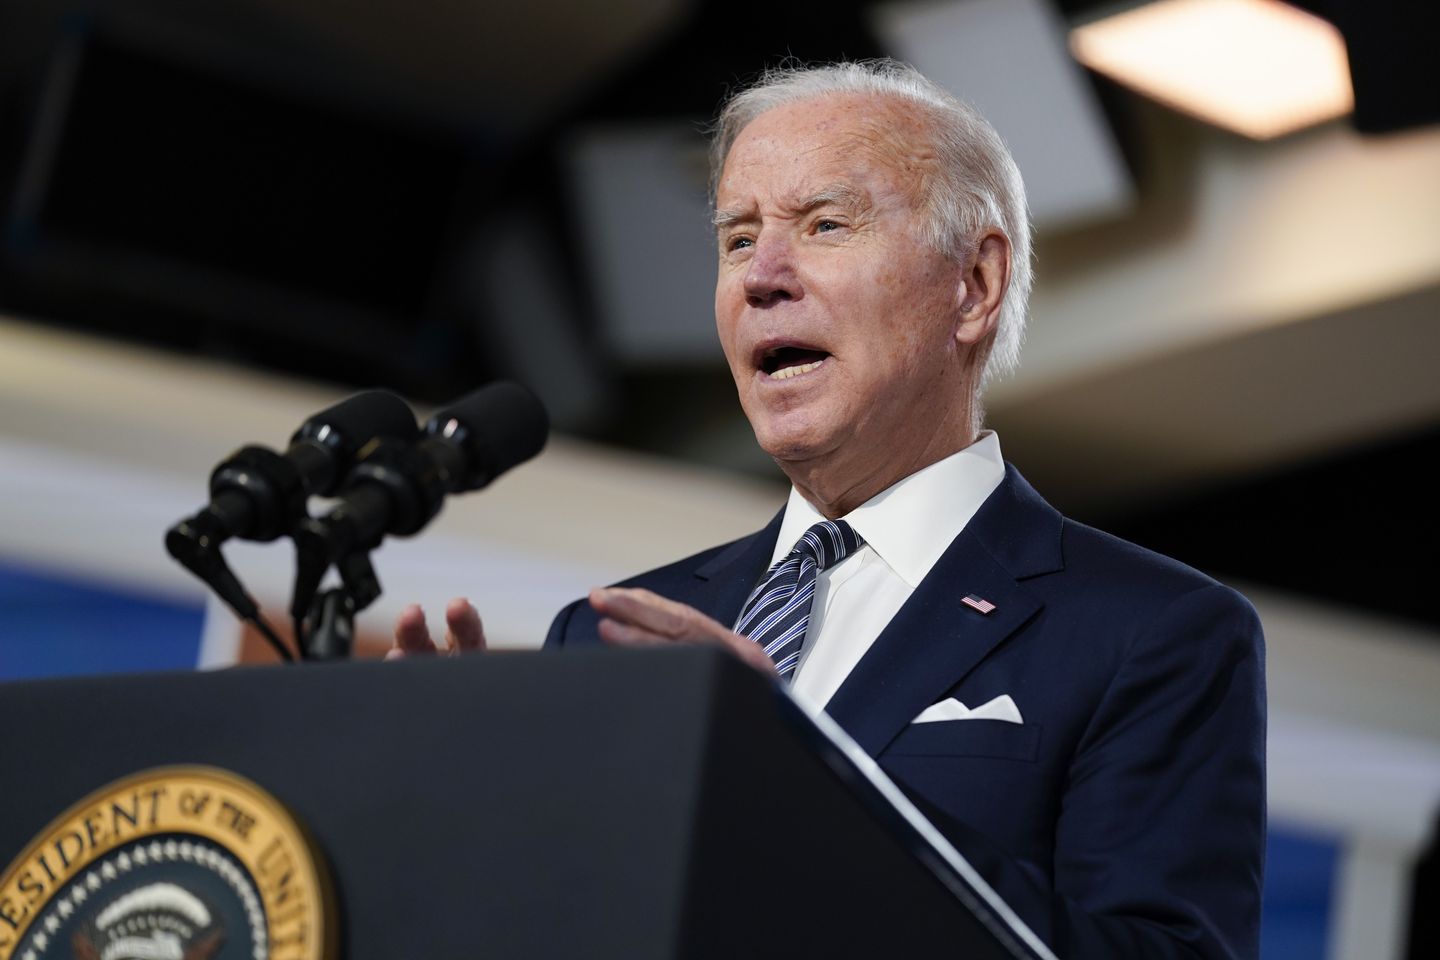 Biden slams Supreme Courts moves on Texas abortion law, urges Congress to codify Roe v. Wade